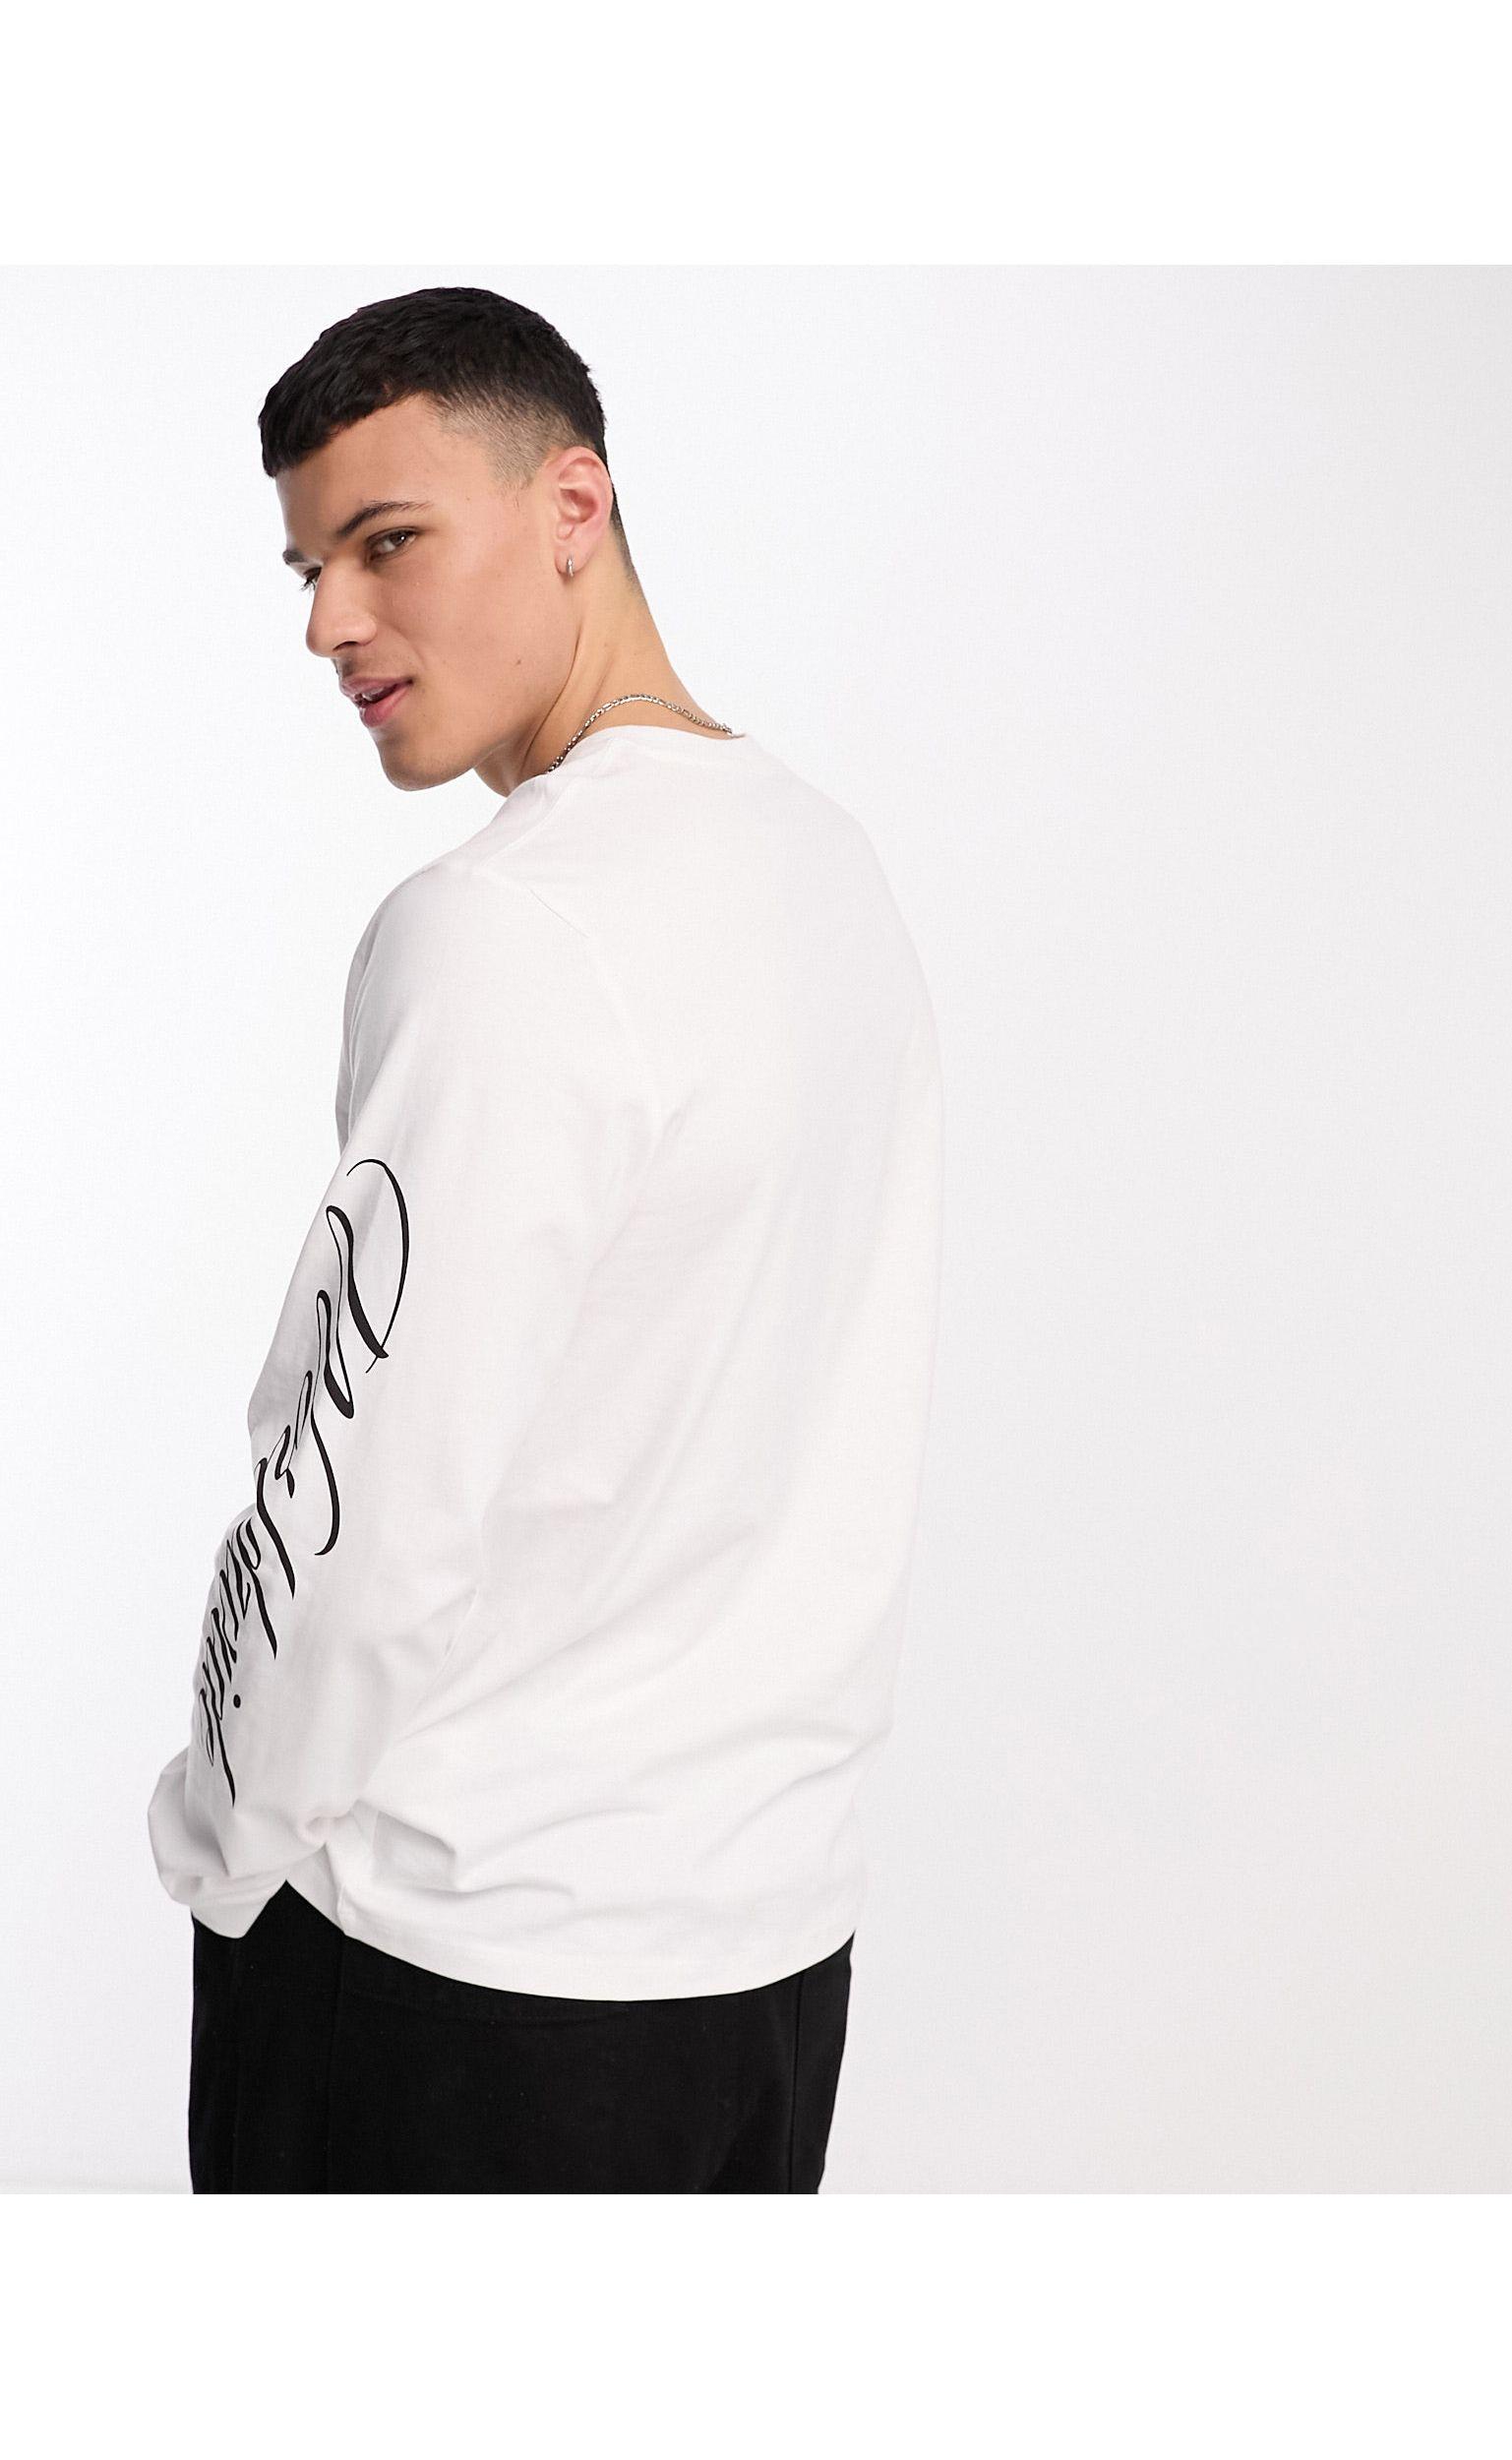 & Jones Originals Long Sleeve With Sleeve Print in Natural for | Lyst